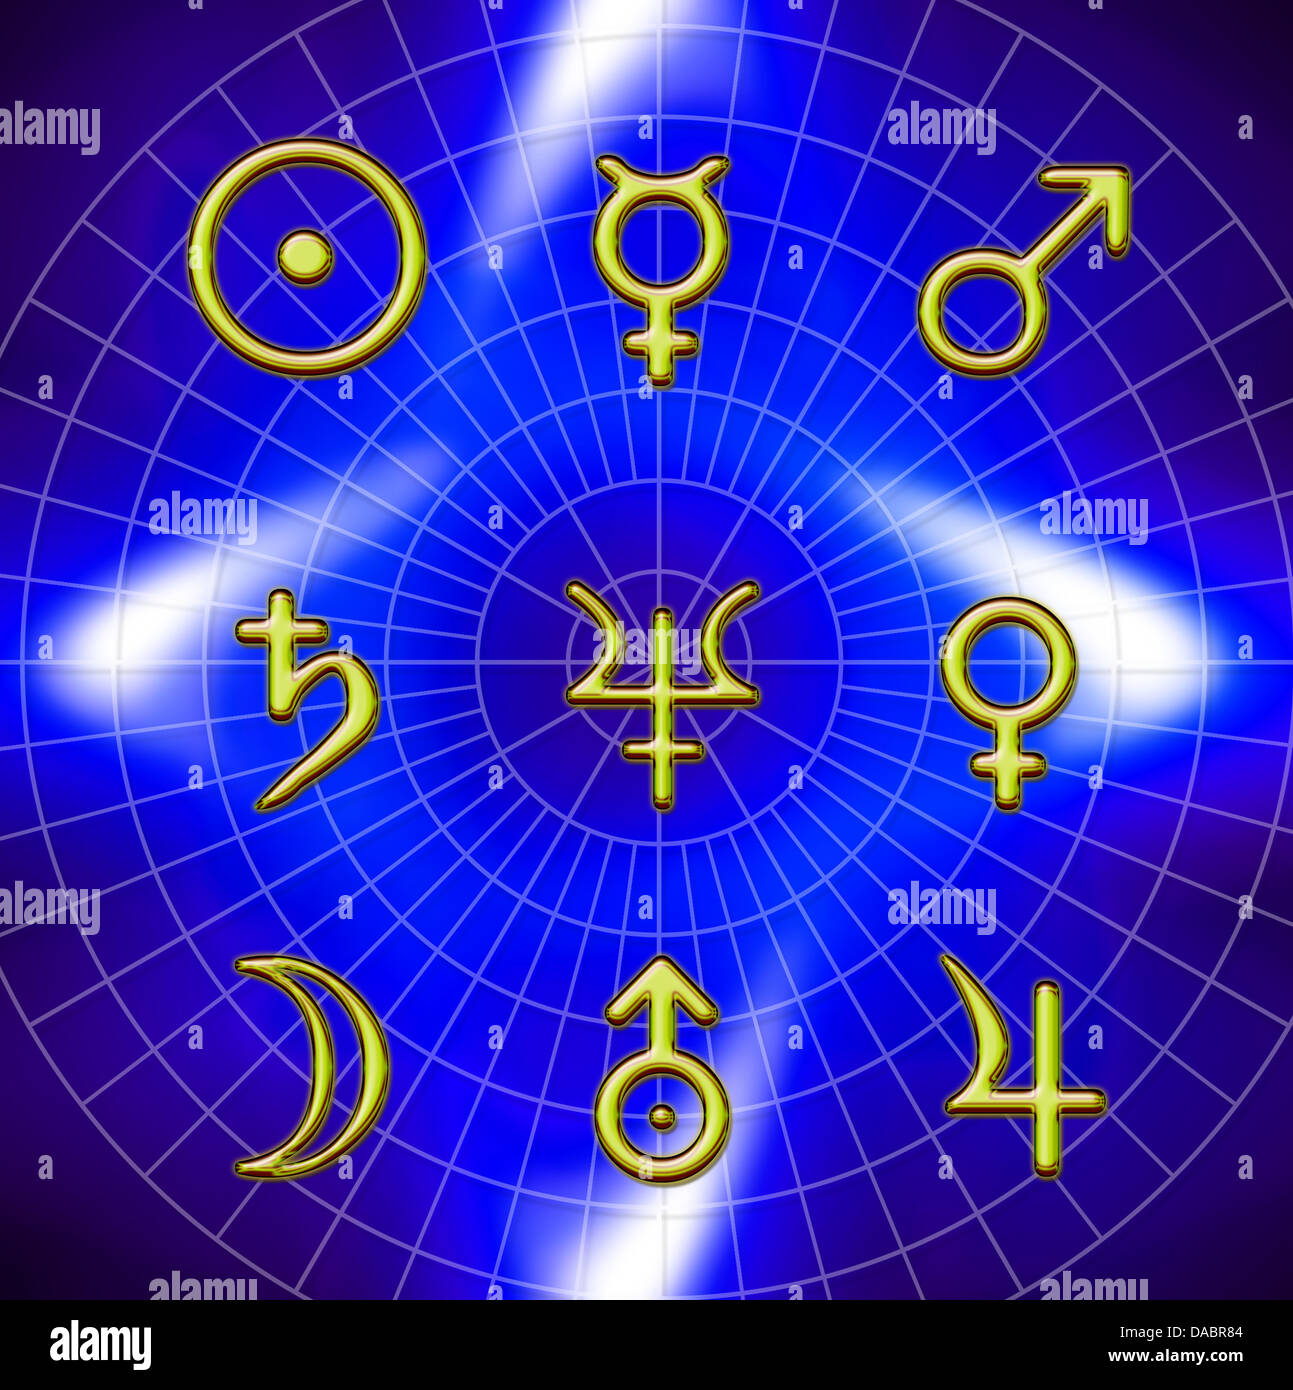 astrological symbols of planets Stock Photo